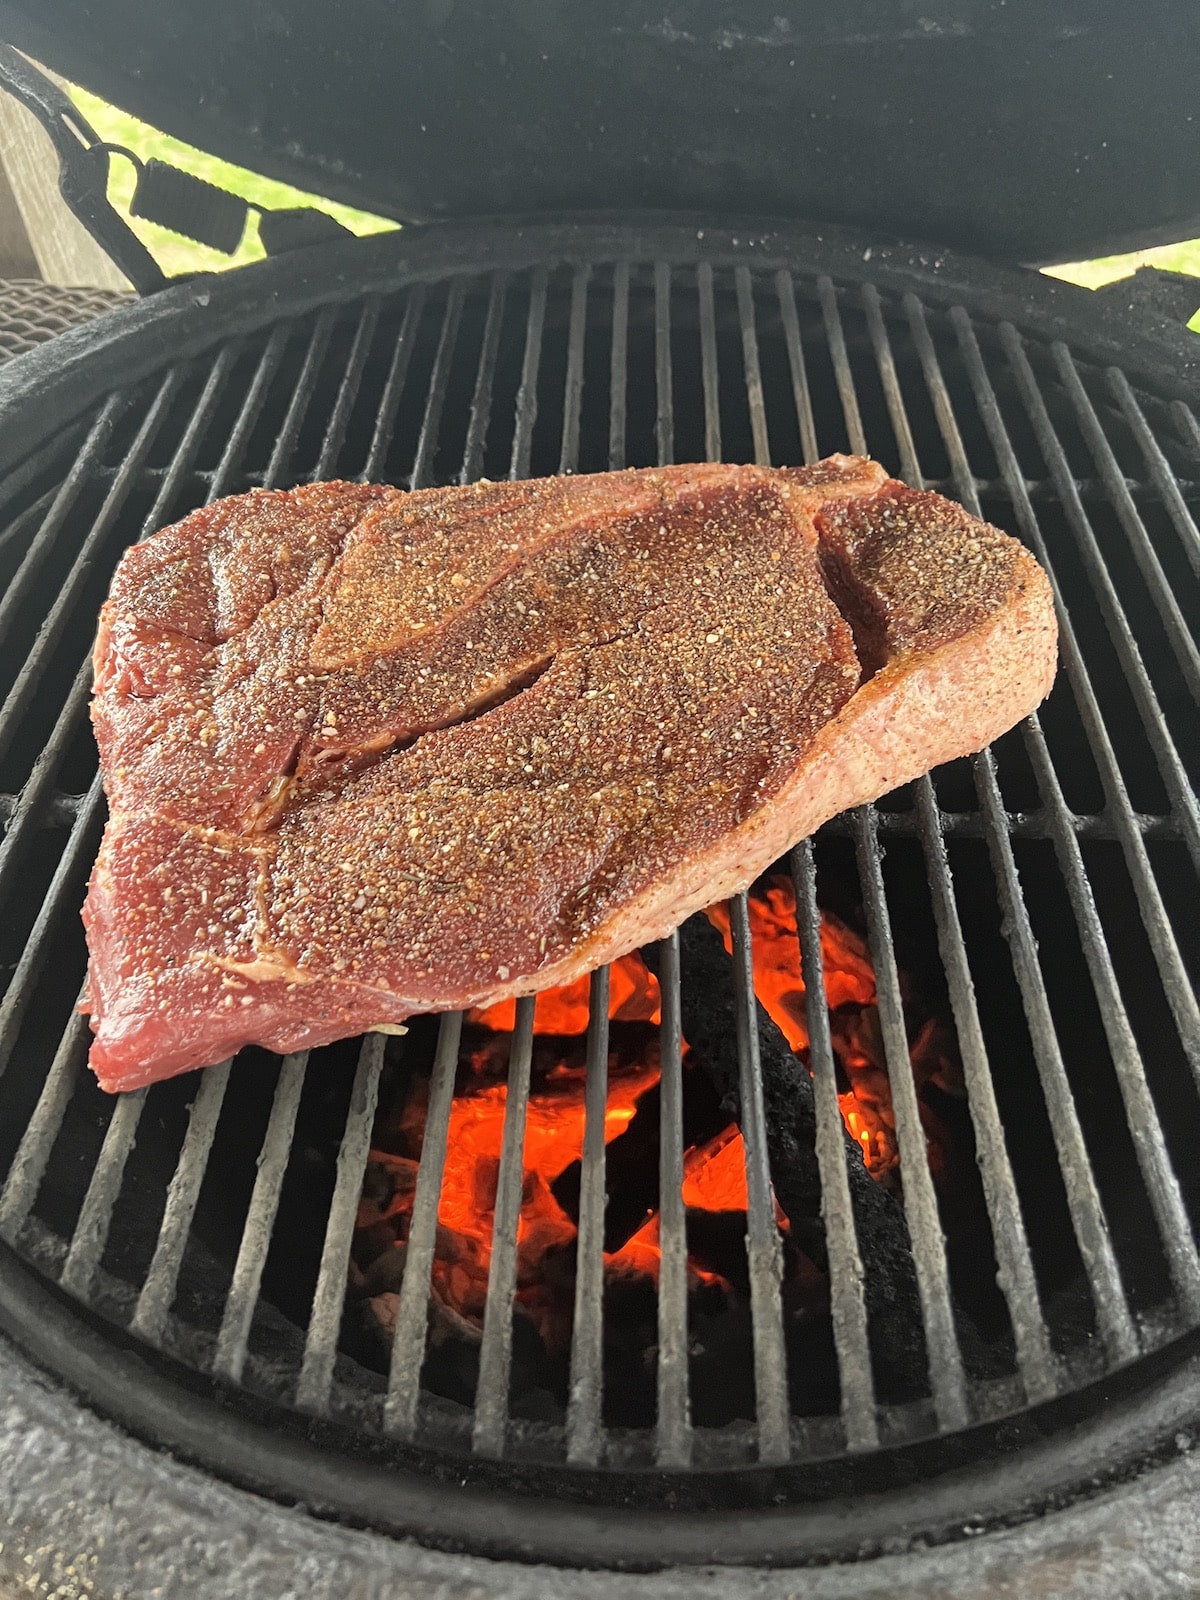 Sirloin steak on a charcoal grill.